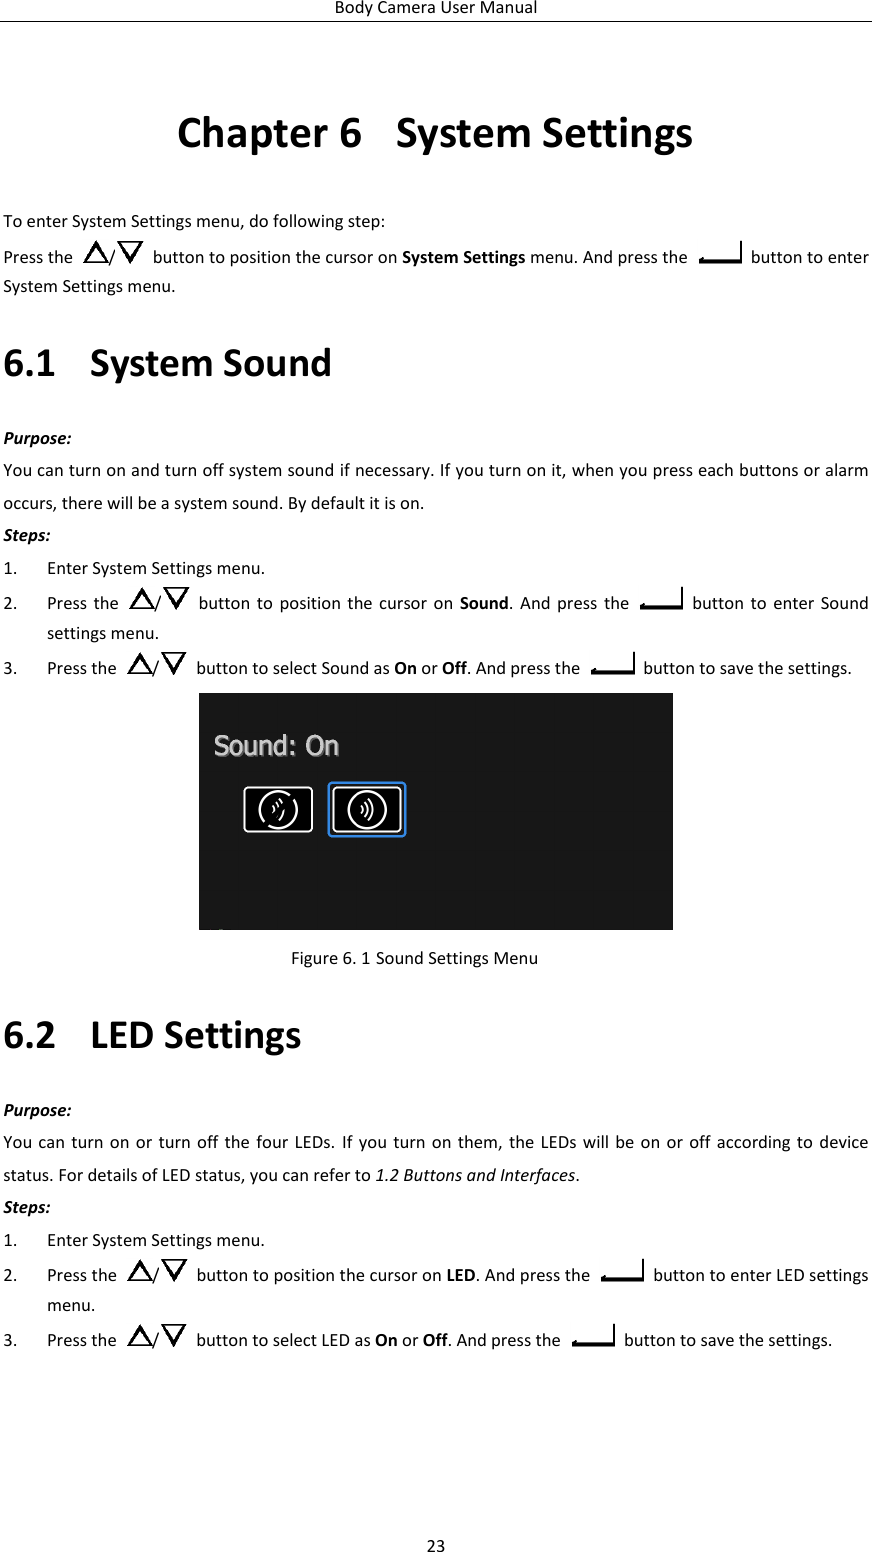 Body Camera User Manual 23 Chapter 6  System Settings To enter System Settings menu, do following step: Press the  /   button to position the cursor on System Settings menu. And press the    button to enter System Settings menu. 6.1 System Sound Purpose: You can turn on and turn off system sound if necessary. If you turn on it, when you press each buttons or alarm occurs, there will be a system sound. By default it is on. Steps: 1. Enter System Settings menu. 2. Press the  /   button  to position  the  cursor on  Sound. And  press  the    button to  enter  Sound settings menu. 3. Press the  /   button to select Sound as On or Off. And press the    button to save the settings.  Figure 6. 1 Sound Settings Menu 6.2 LED Settings Purpose: You can  turn  on or  turn off  the  four LEDs. If  you turn on  them,  the  LEDs will be  on  or off according to  device status. For details of LED status, you can refer to 1.2 Buttons and Interfaces. Steps: 1. Enter System Settings menu. 2. Press the  /   button to position the cursor on LED. And press the    button to enter LED settings menu. 3. Press the  /   button to select LED as On or Off. And press the    button to save the settings. 